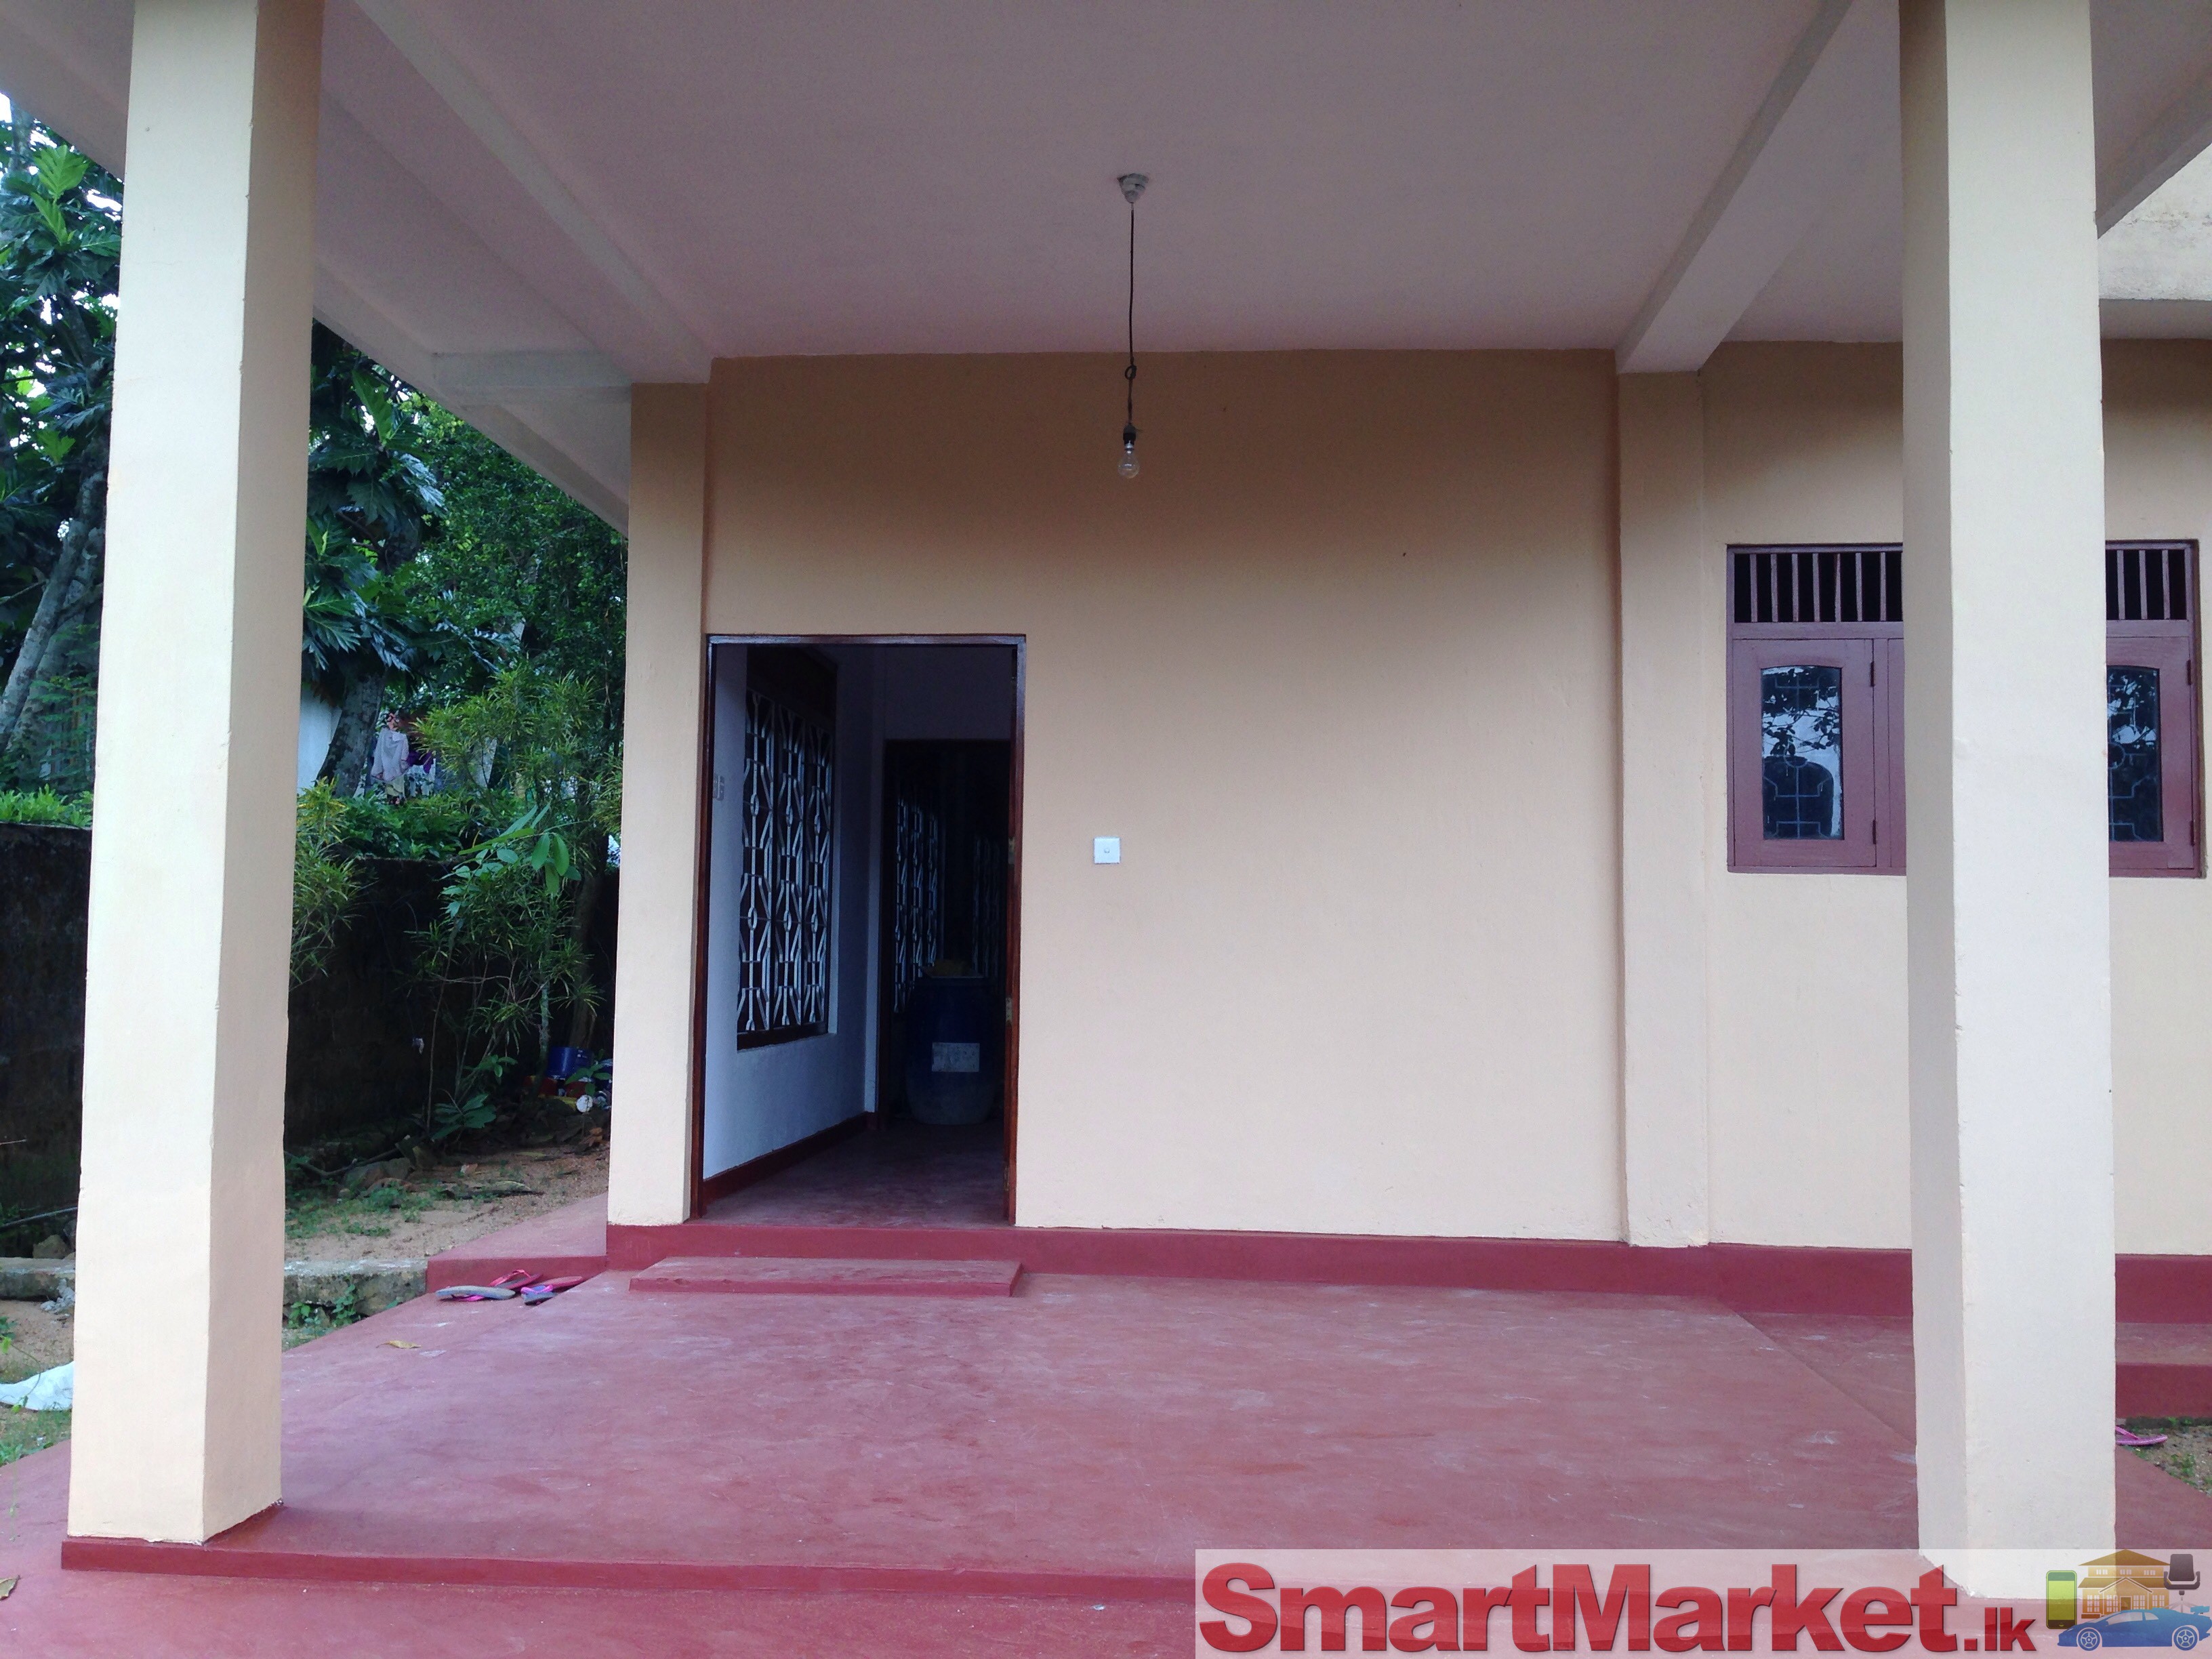 A house for sale in Kosgama, Awissawella